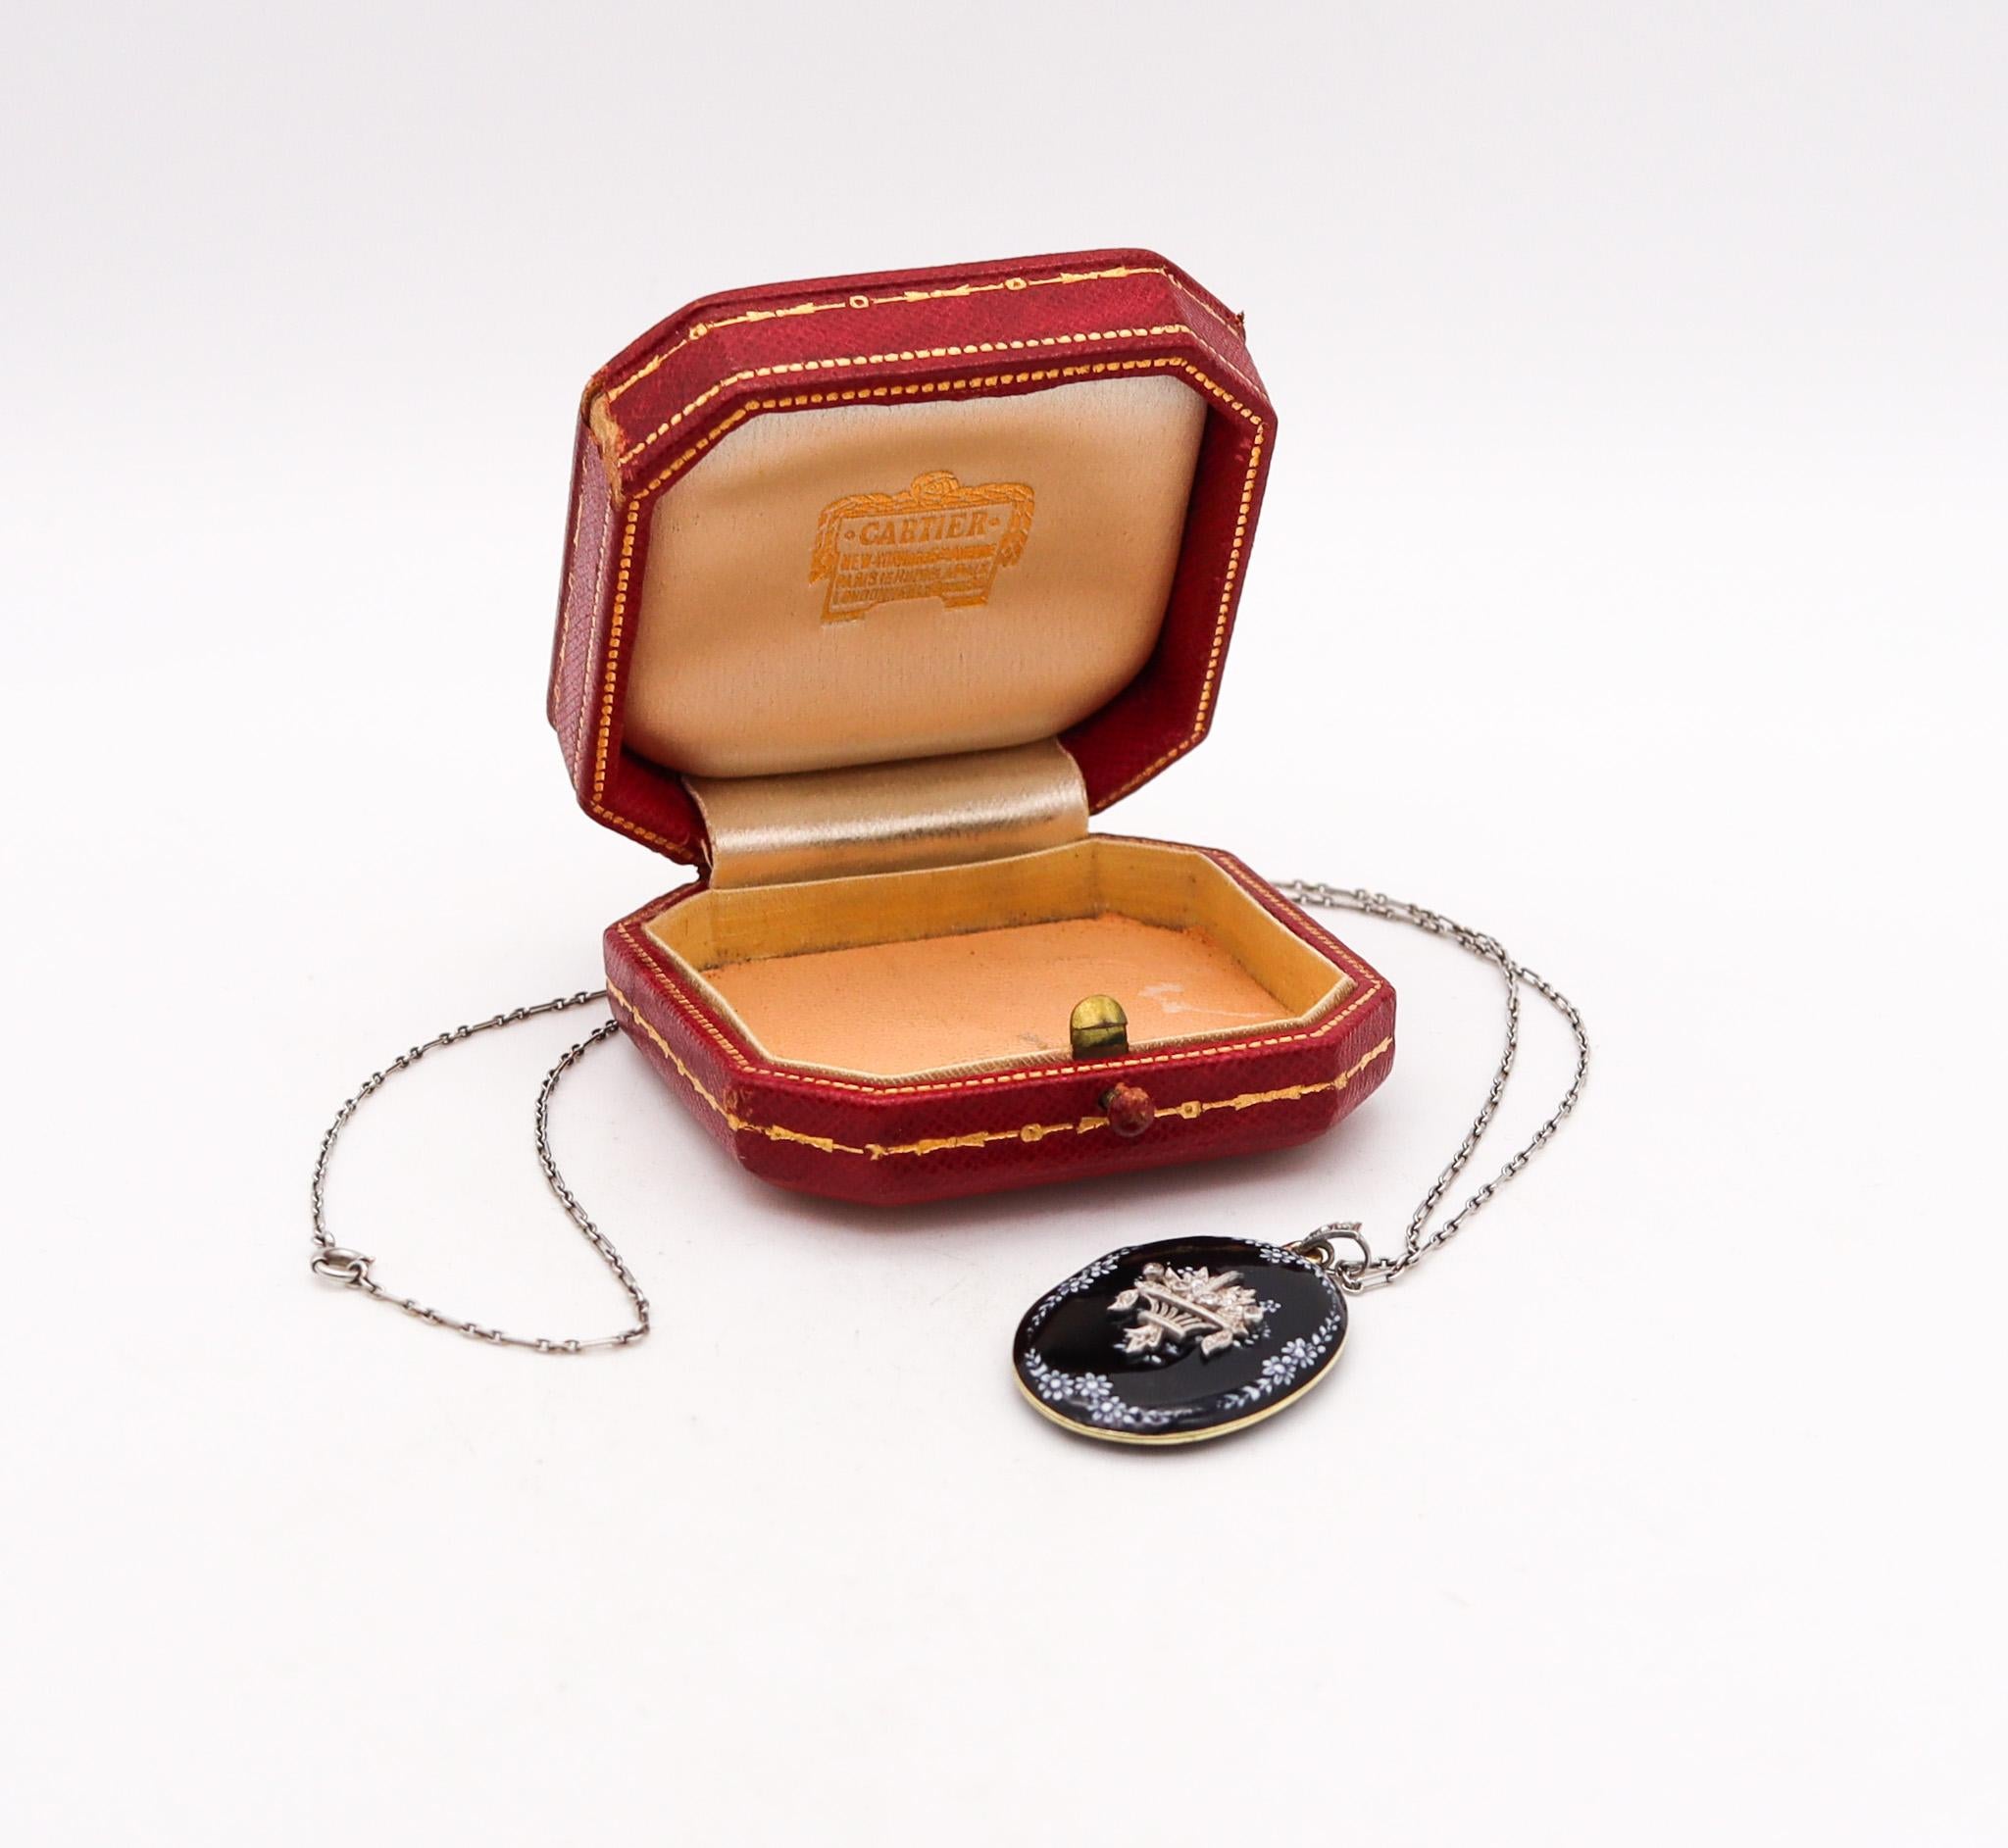 Locket necklace designed by Cartier.

Gorgeous antique locket-necklace, created during the early Edwardian period by the house of Cartier, back in the 1900. This beautiful and rare piece was carefully crafted as a hinged oval medallion in two parts